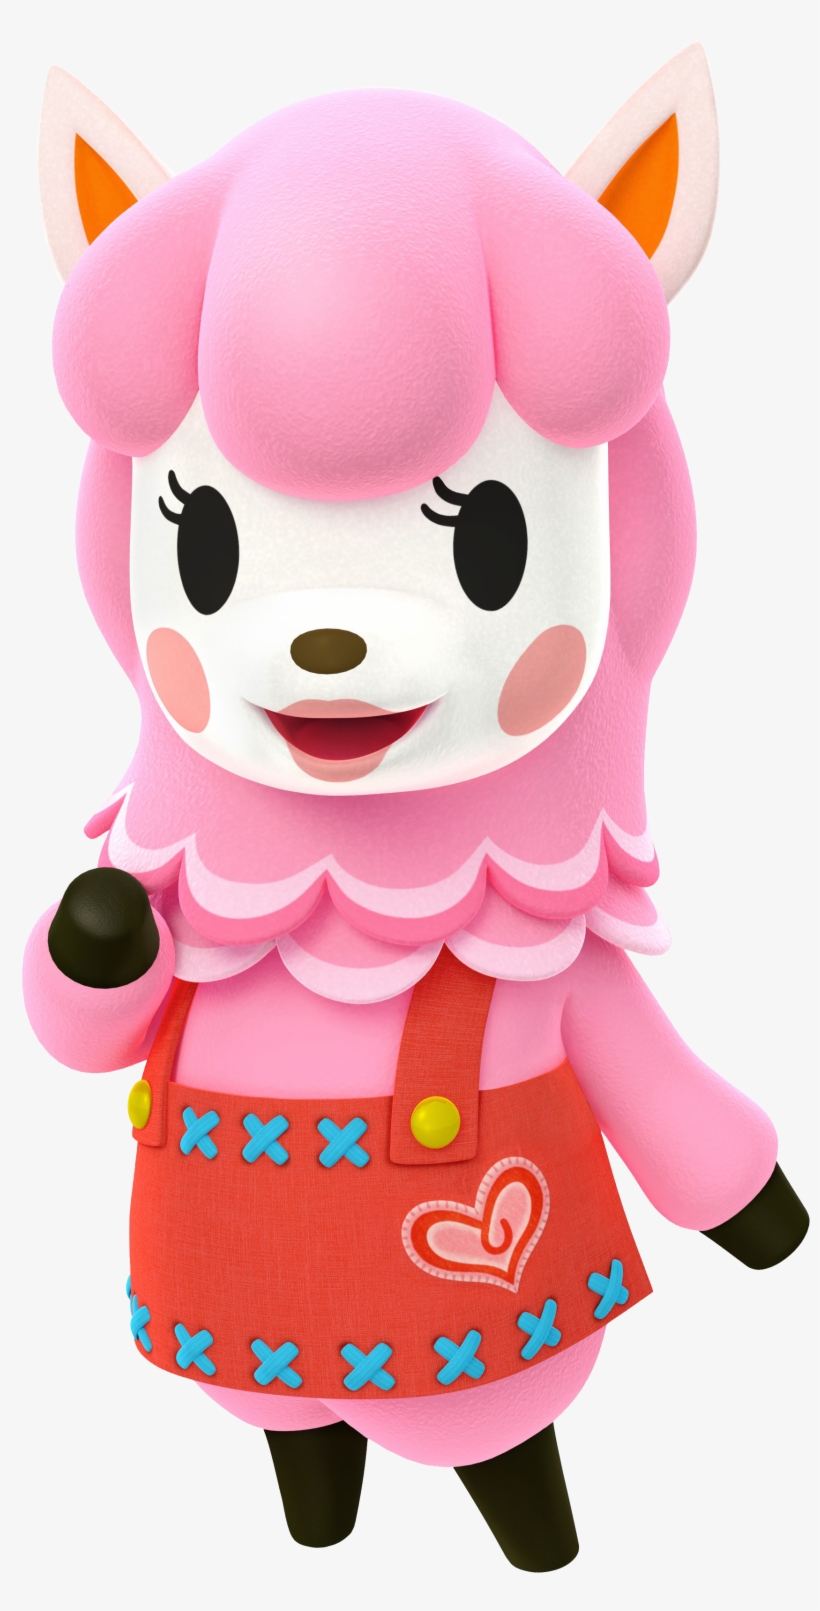 Reese - Animal Crossing Reese, transparent png #2717244